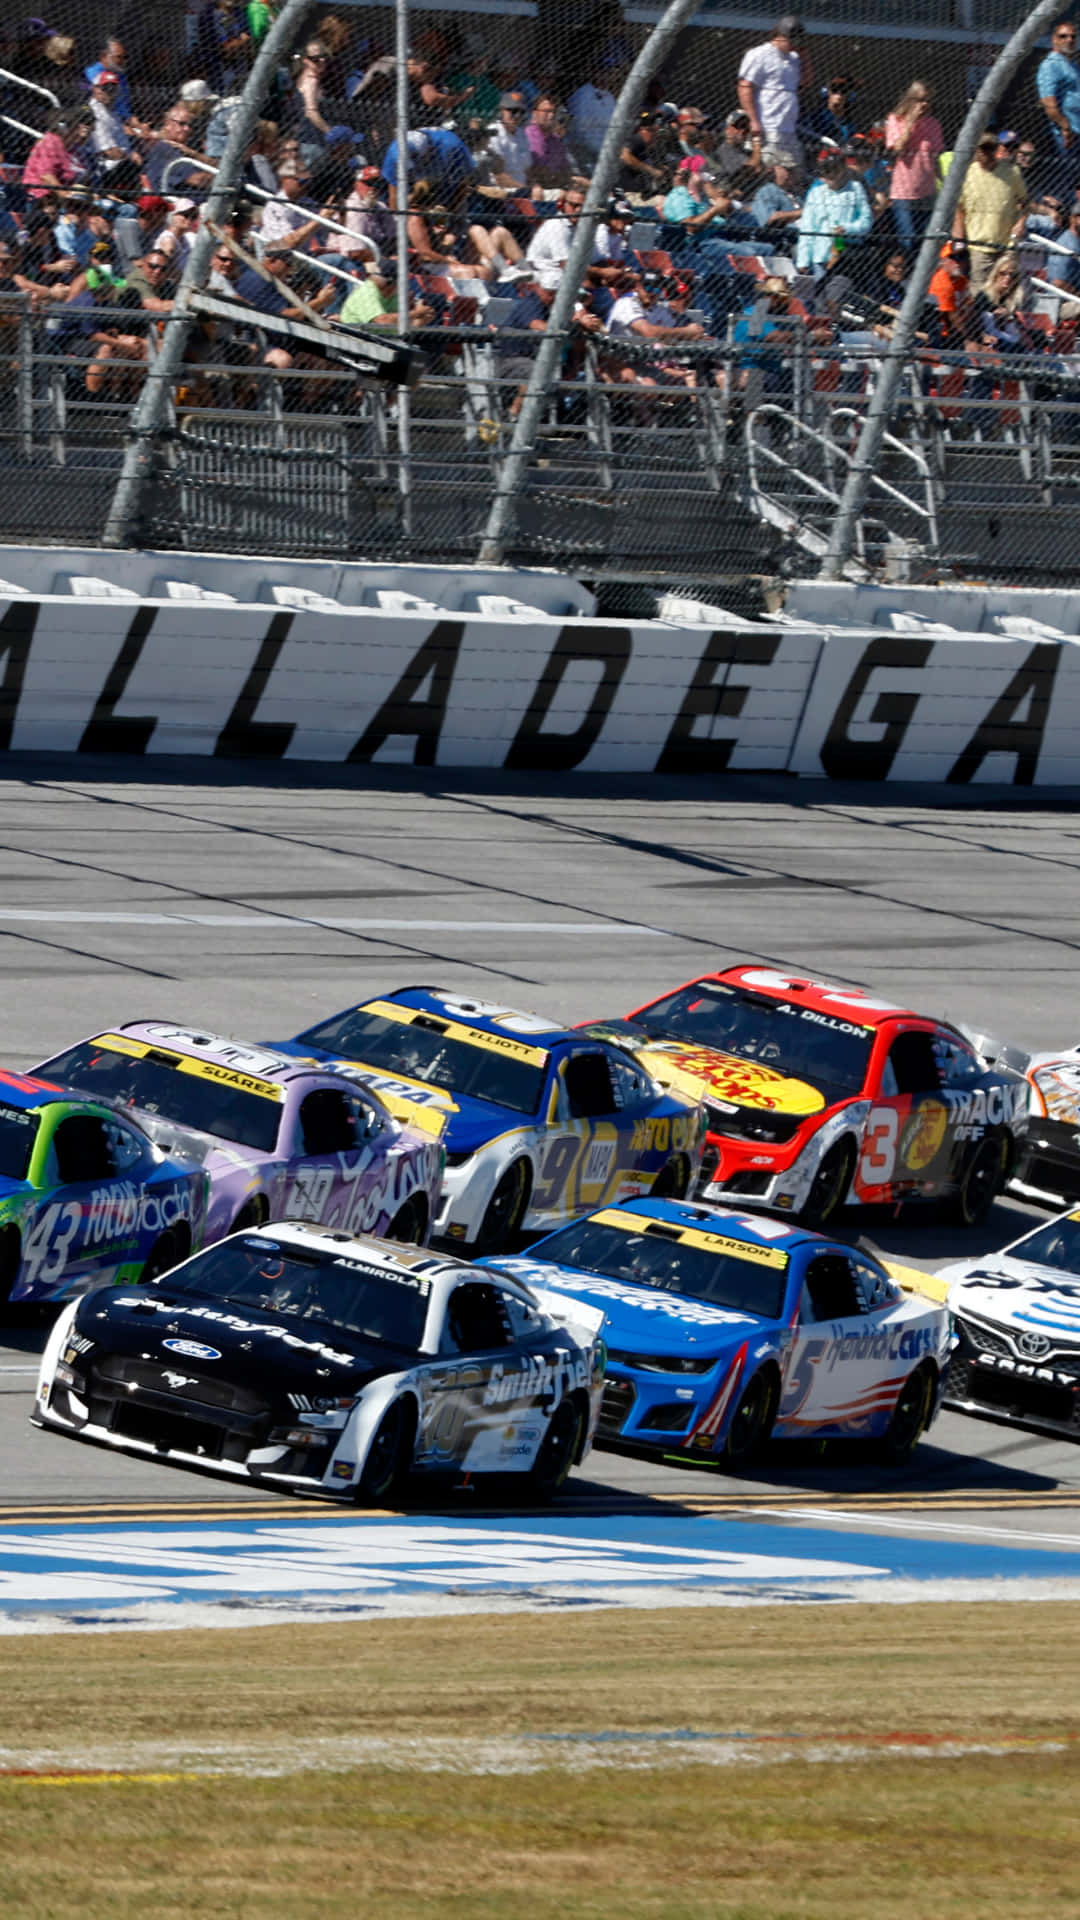 Enjoy your favorite Nascar Races on your iPhone Wallpaper